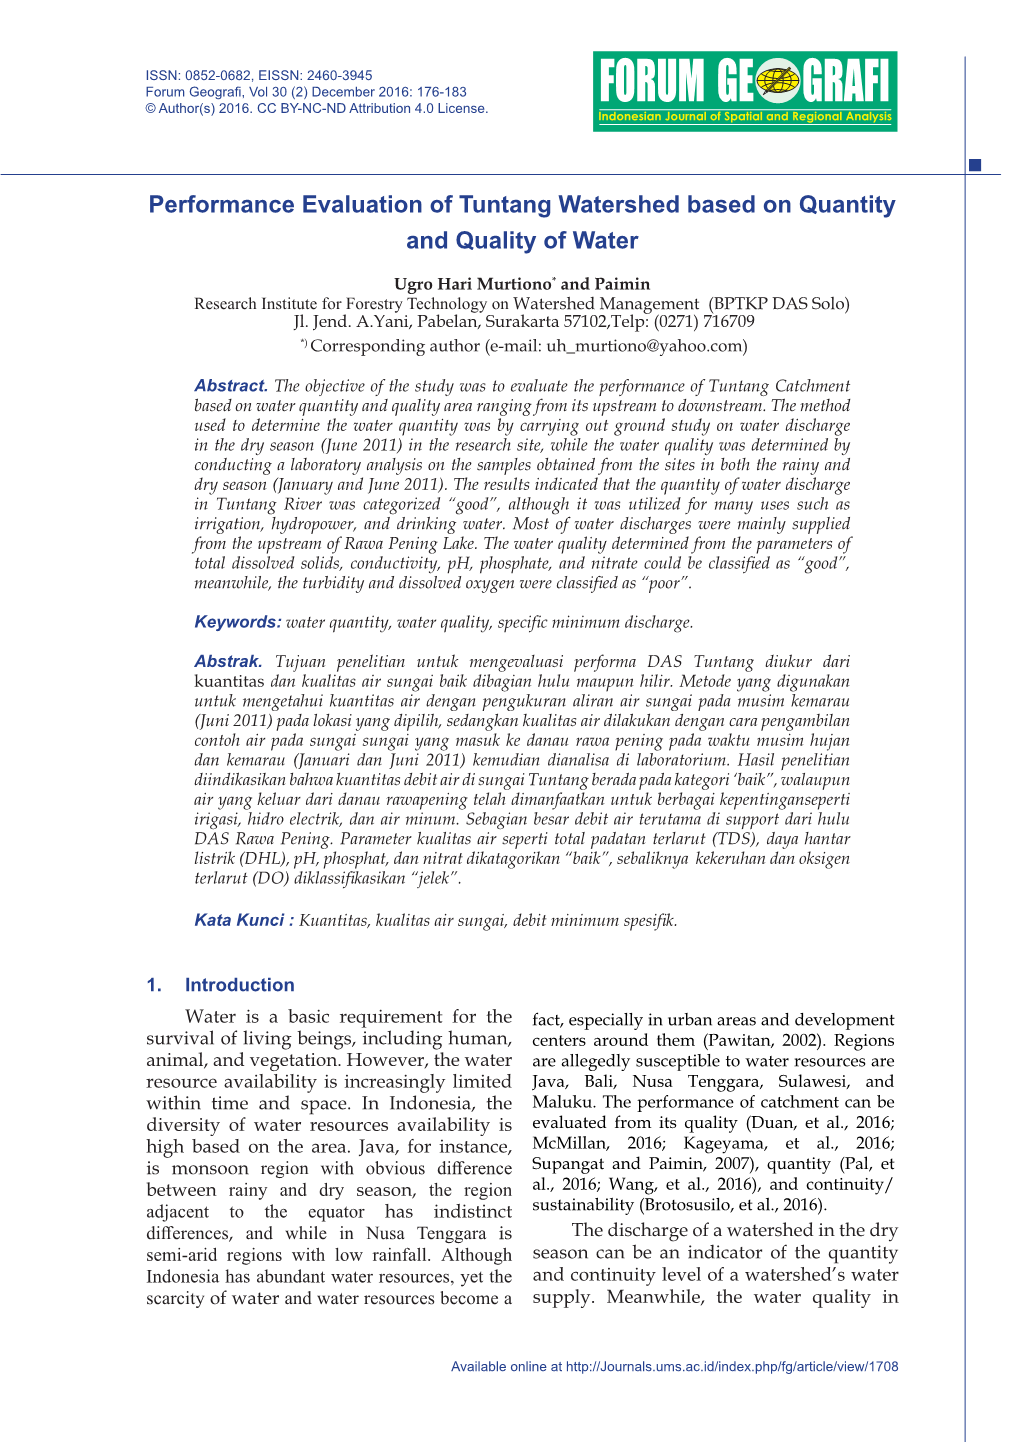 Performance Evaluation of Tuntang Watershed Based on Quantity and Quality of Water